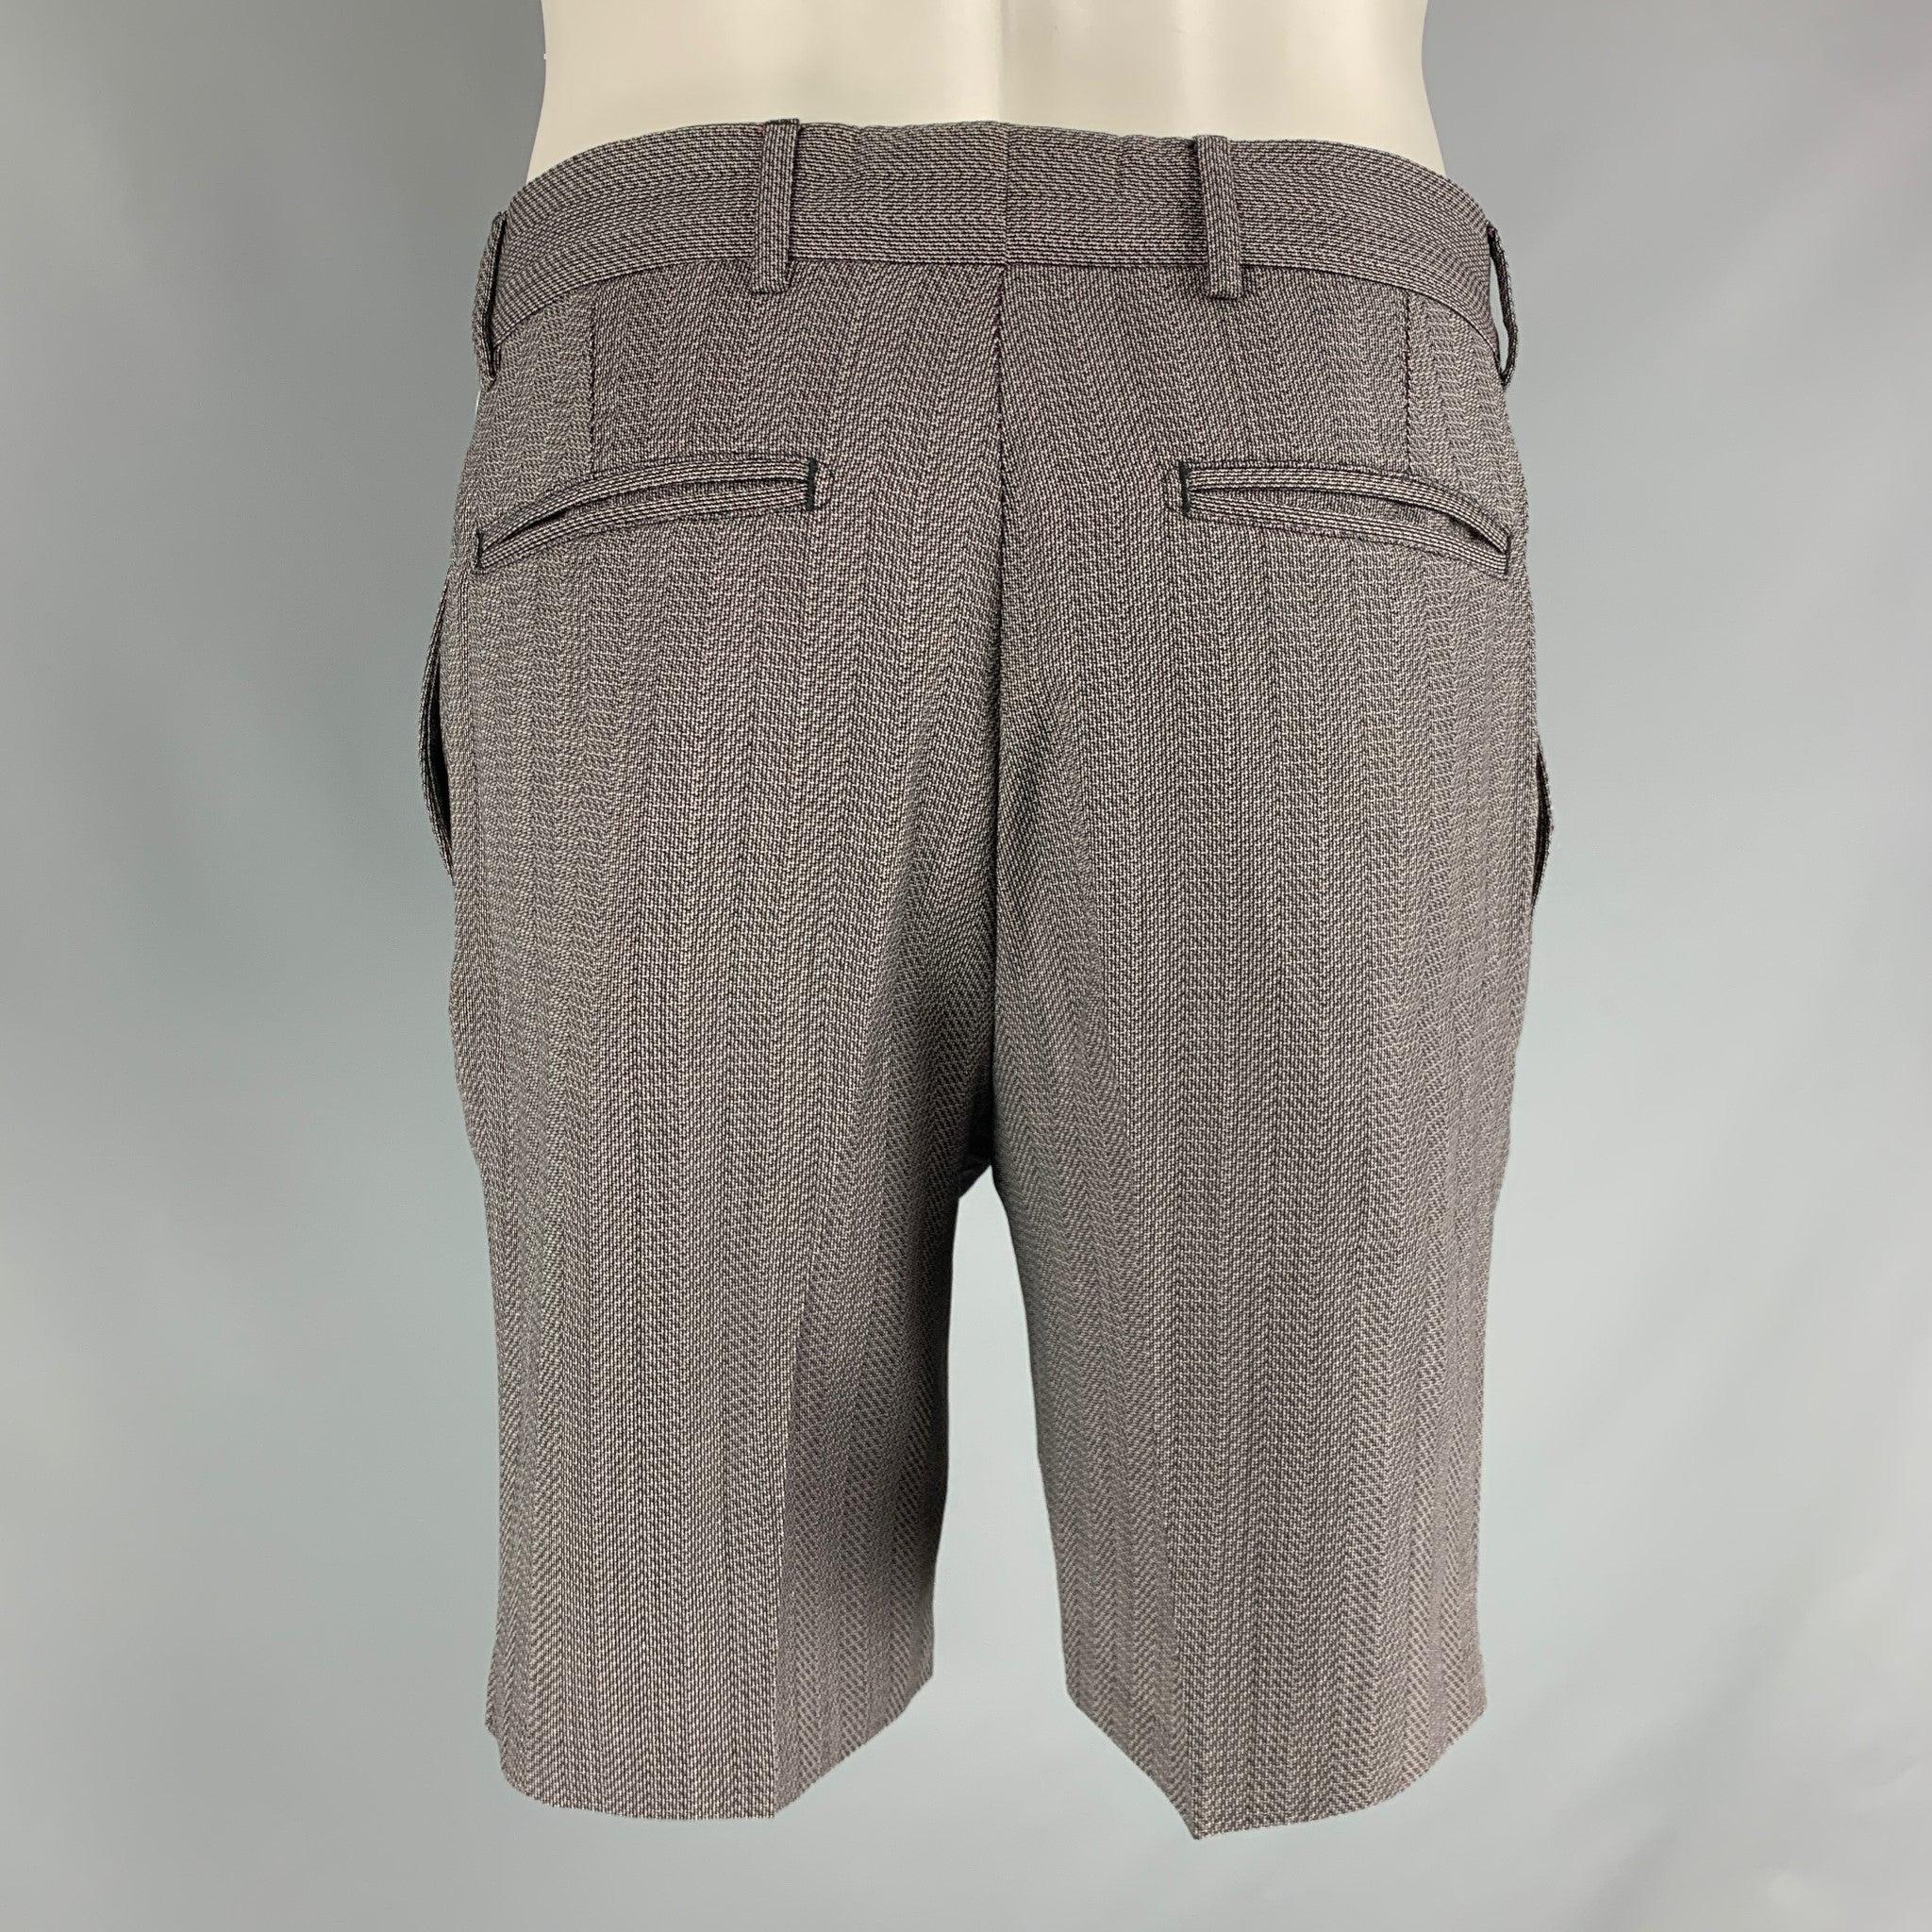 LOUIS VUITTON casual shorts come in grey cotton featuring a nailhead print, zip up closure and a pleated fit. Made in Italy.Very Good Pre-Owned Condition 

Marked:   40 

Measurements: 
  Waist: 32 inches Rise: 10 inches Inseam: 9 inches  
 
 



 